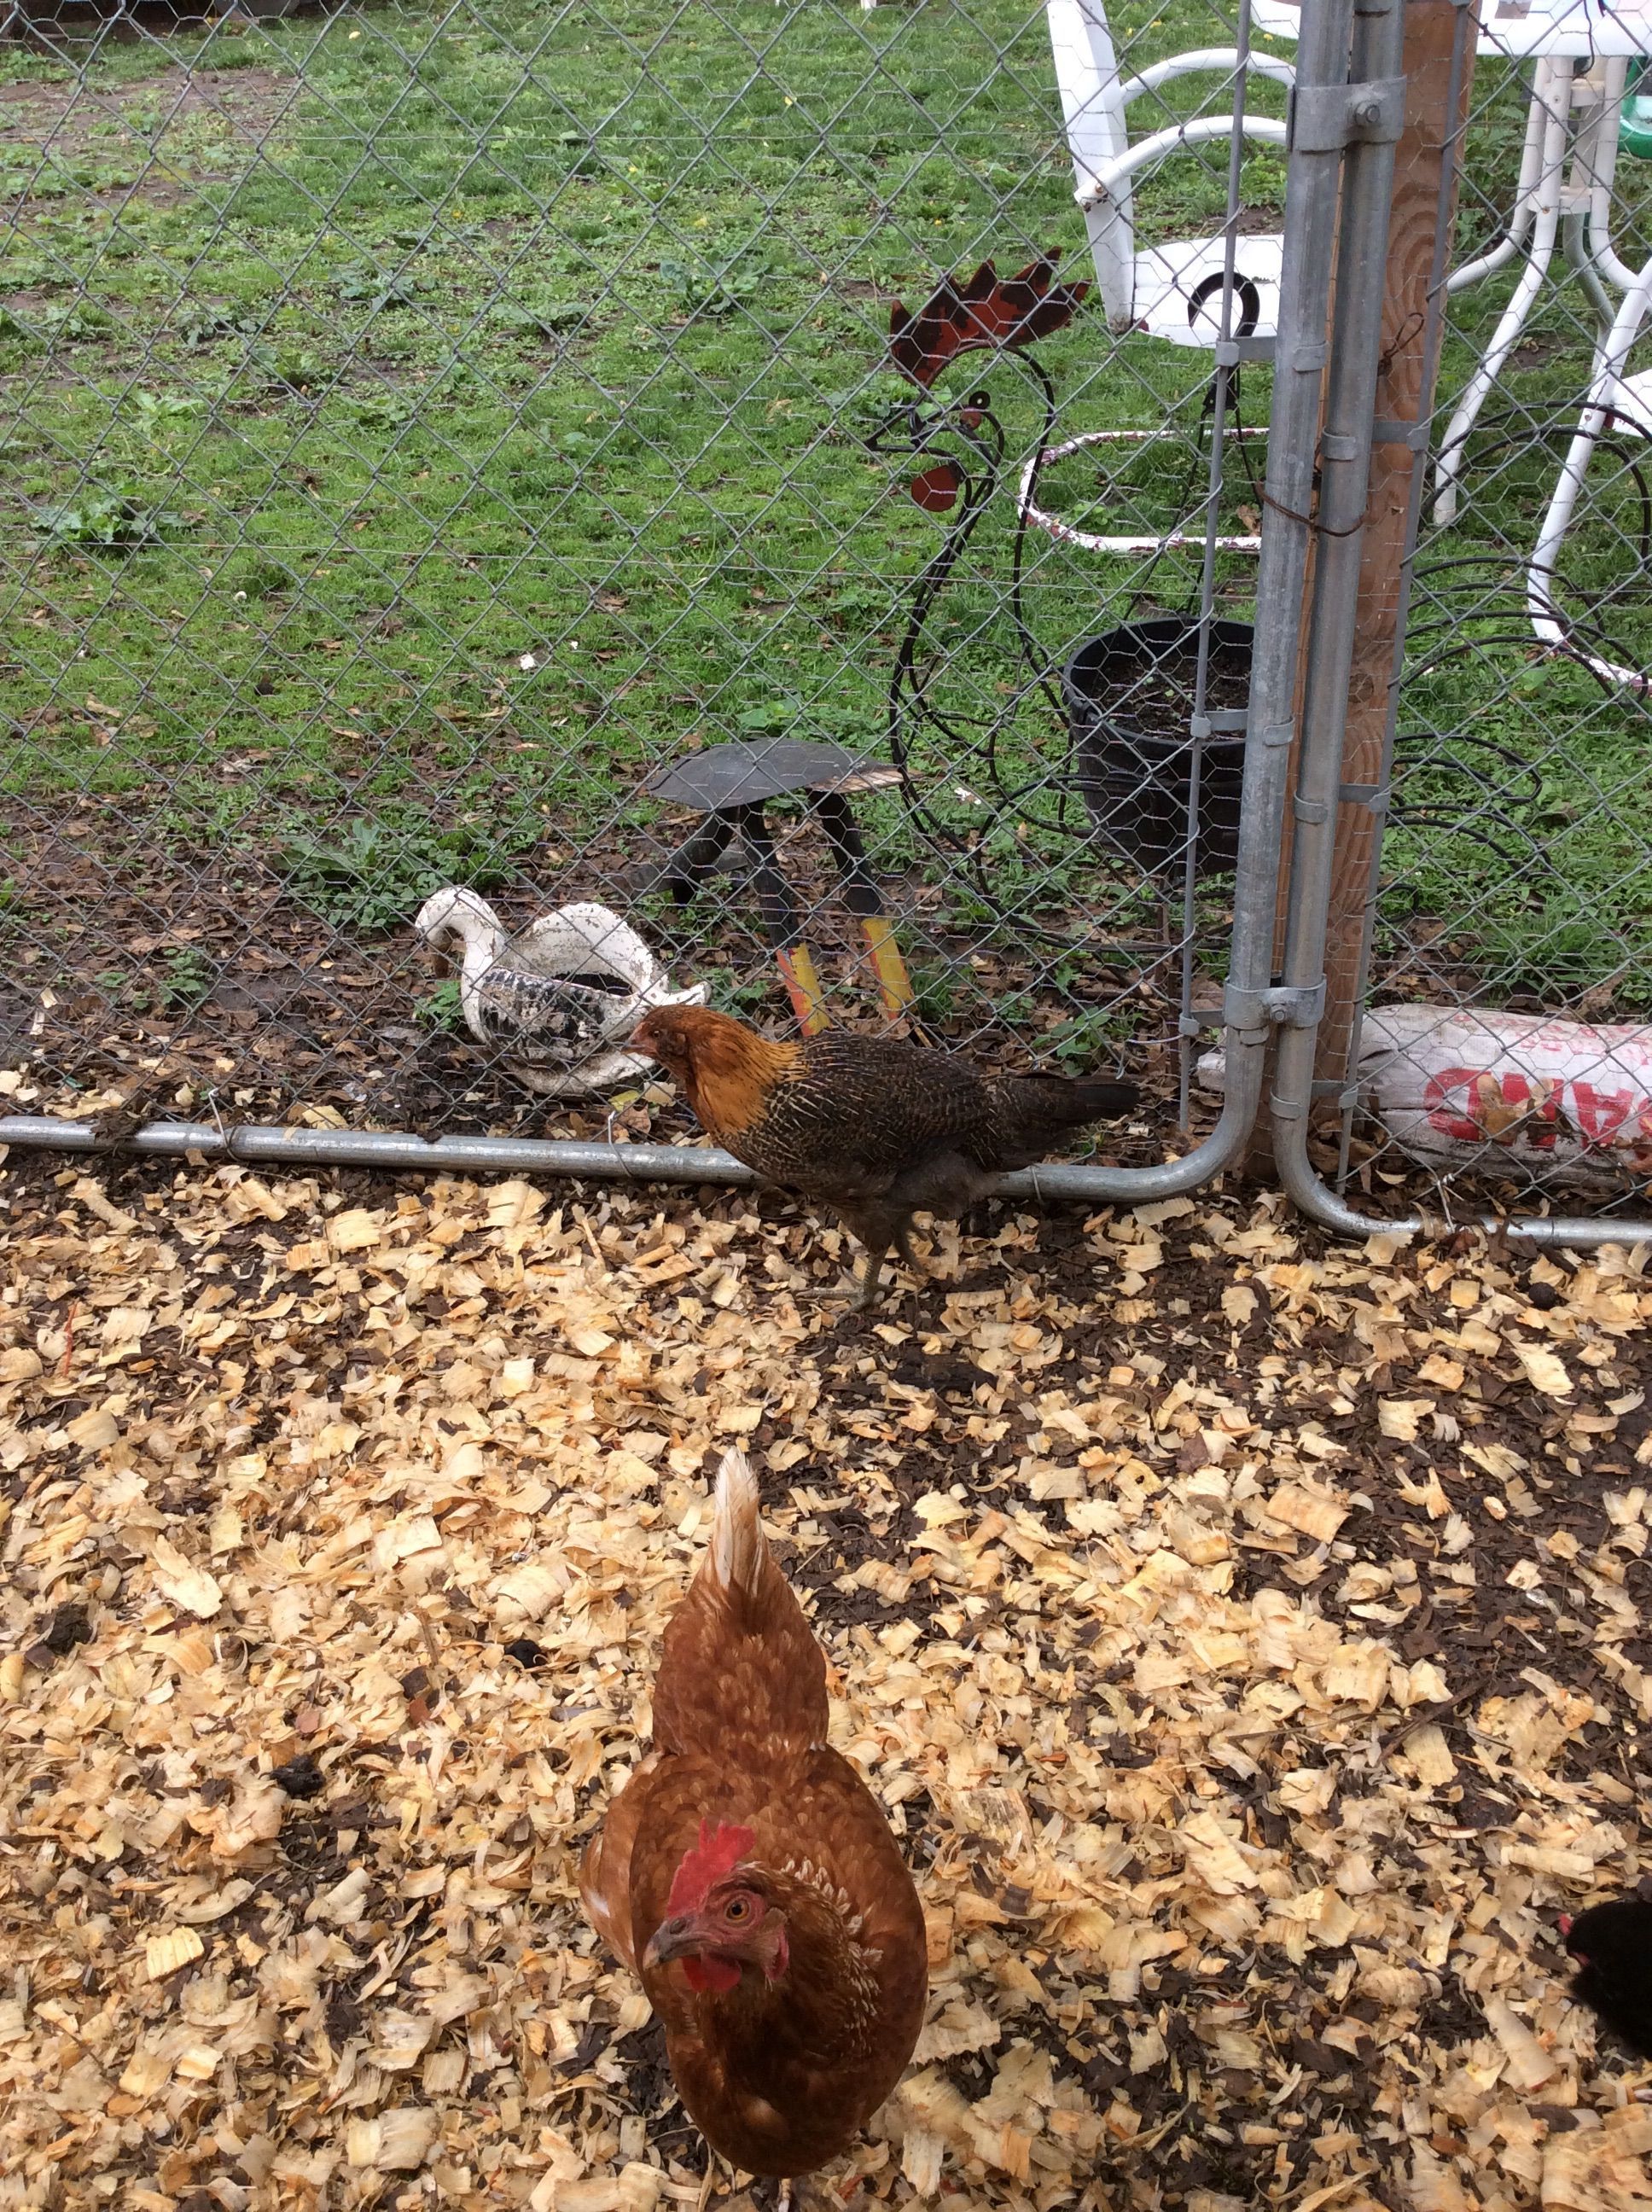 Just a couple of my flock.